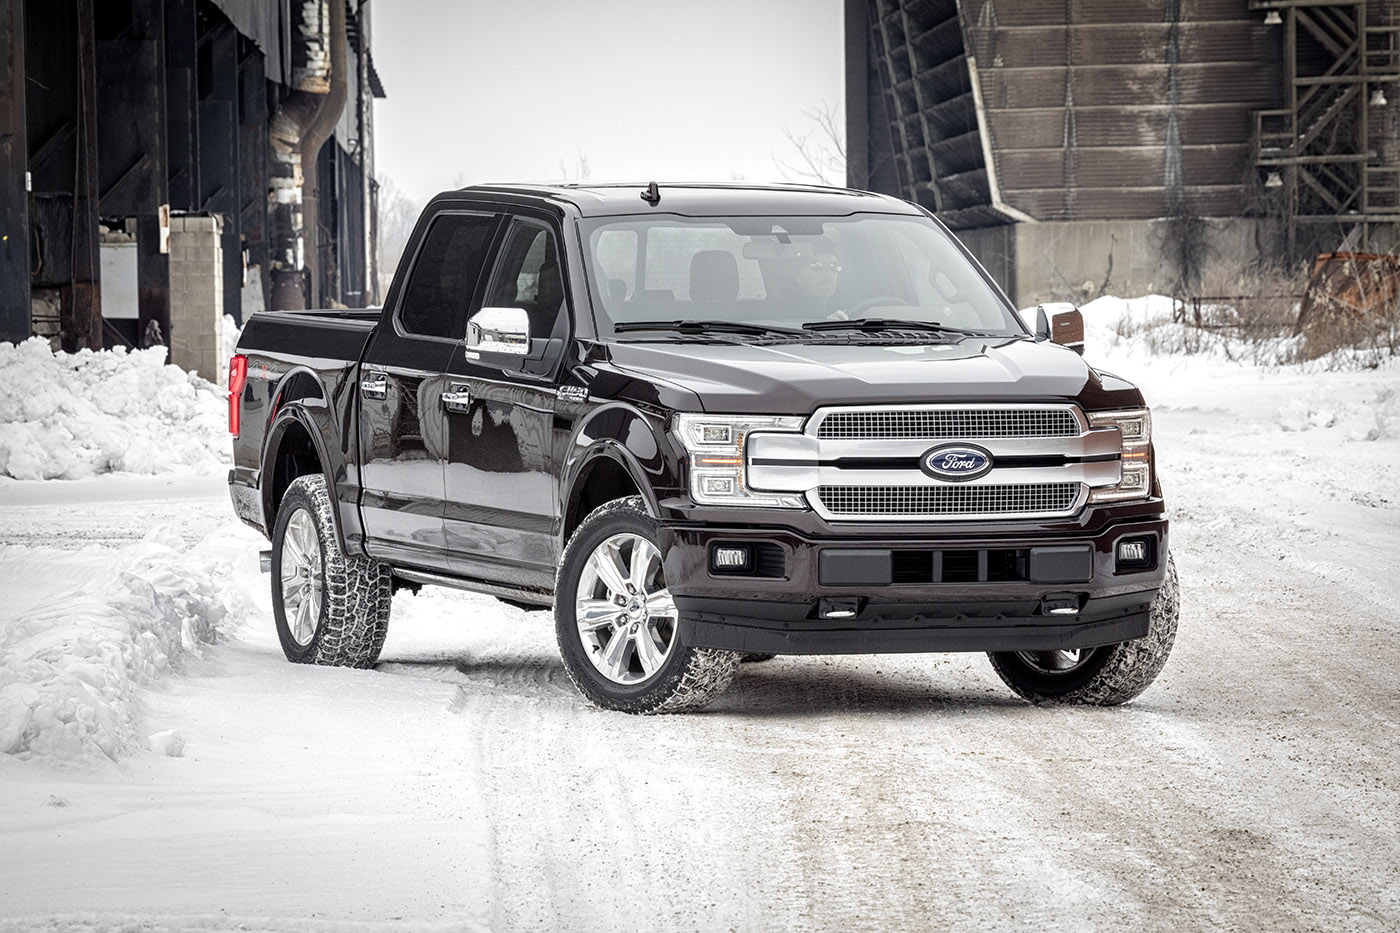 Ford Wants to Keep its Title, Introduces 2018 F-150